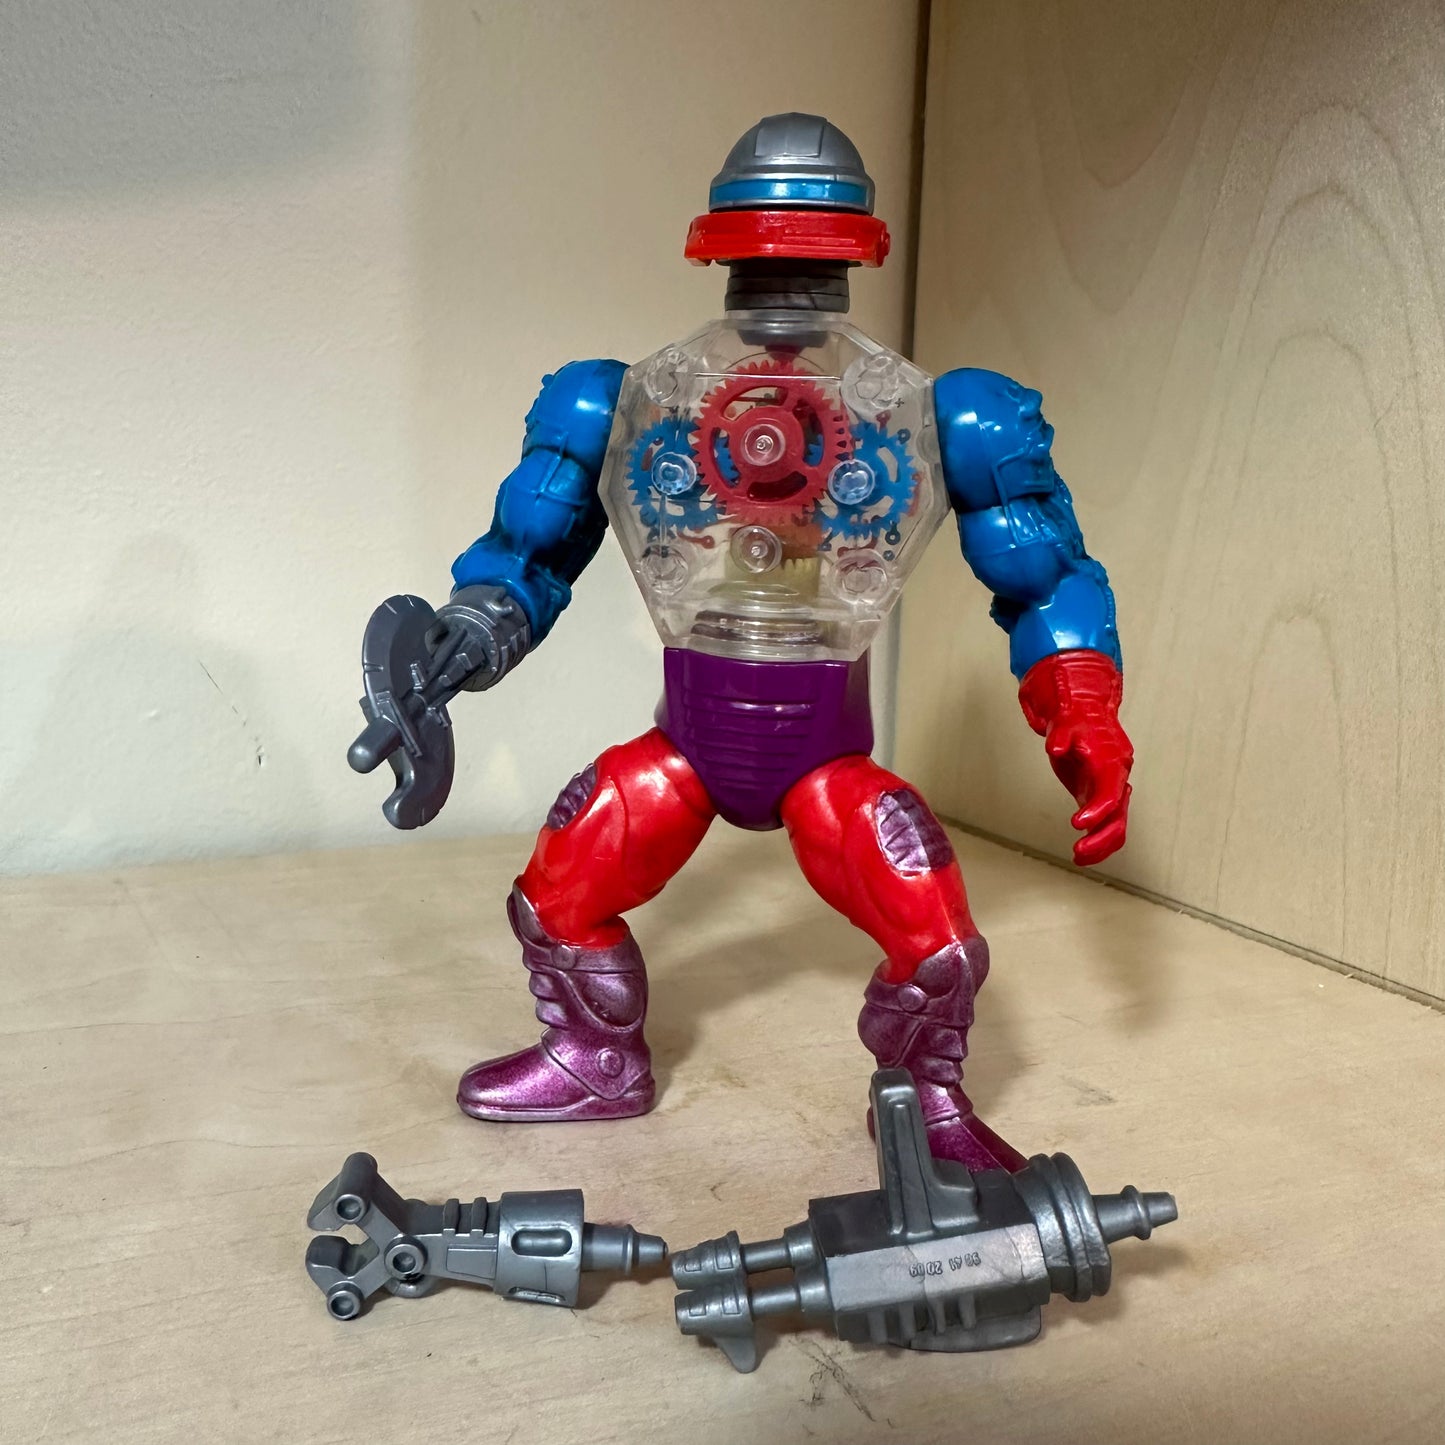 1984 MOTU Roboto Complete Vintage He-Man Master’s of the Universe Action Figure